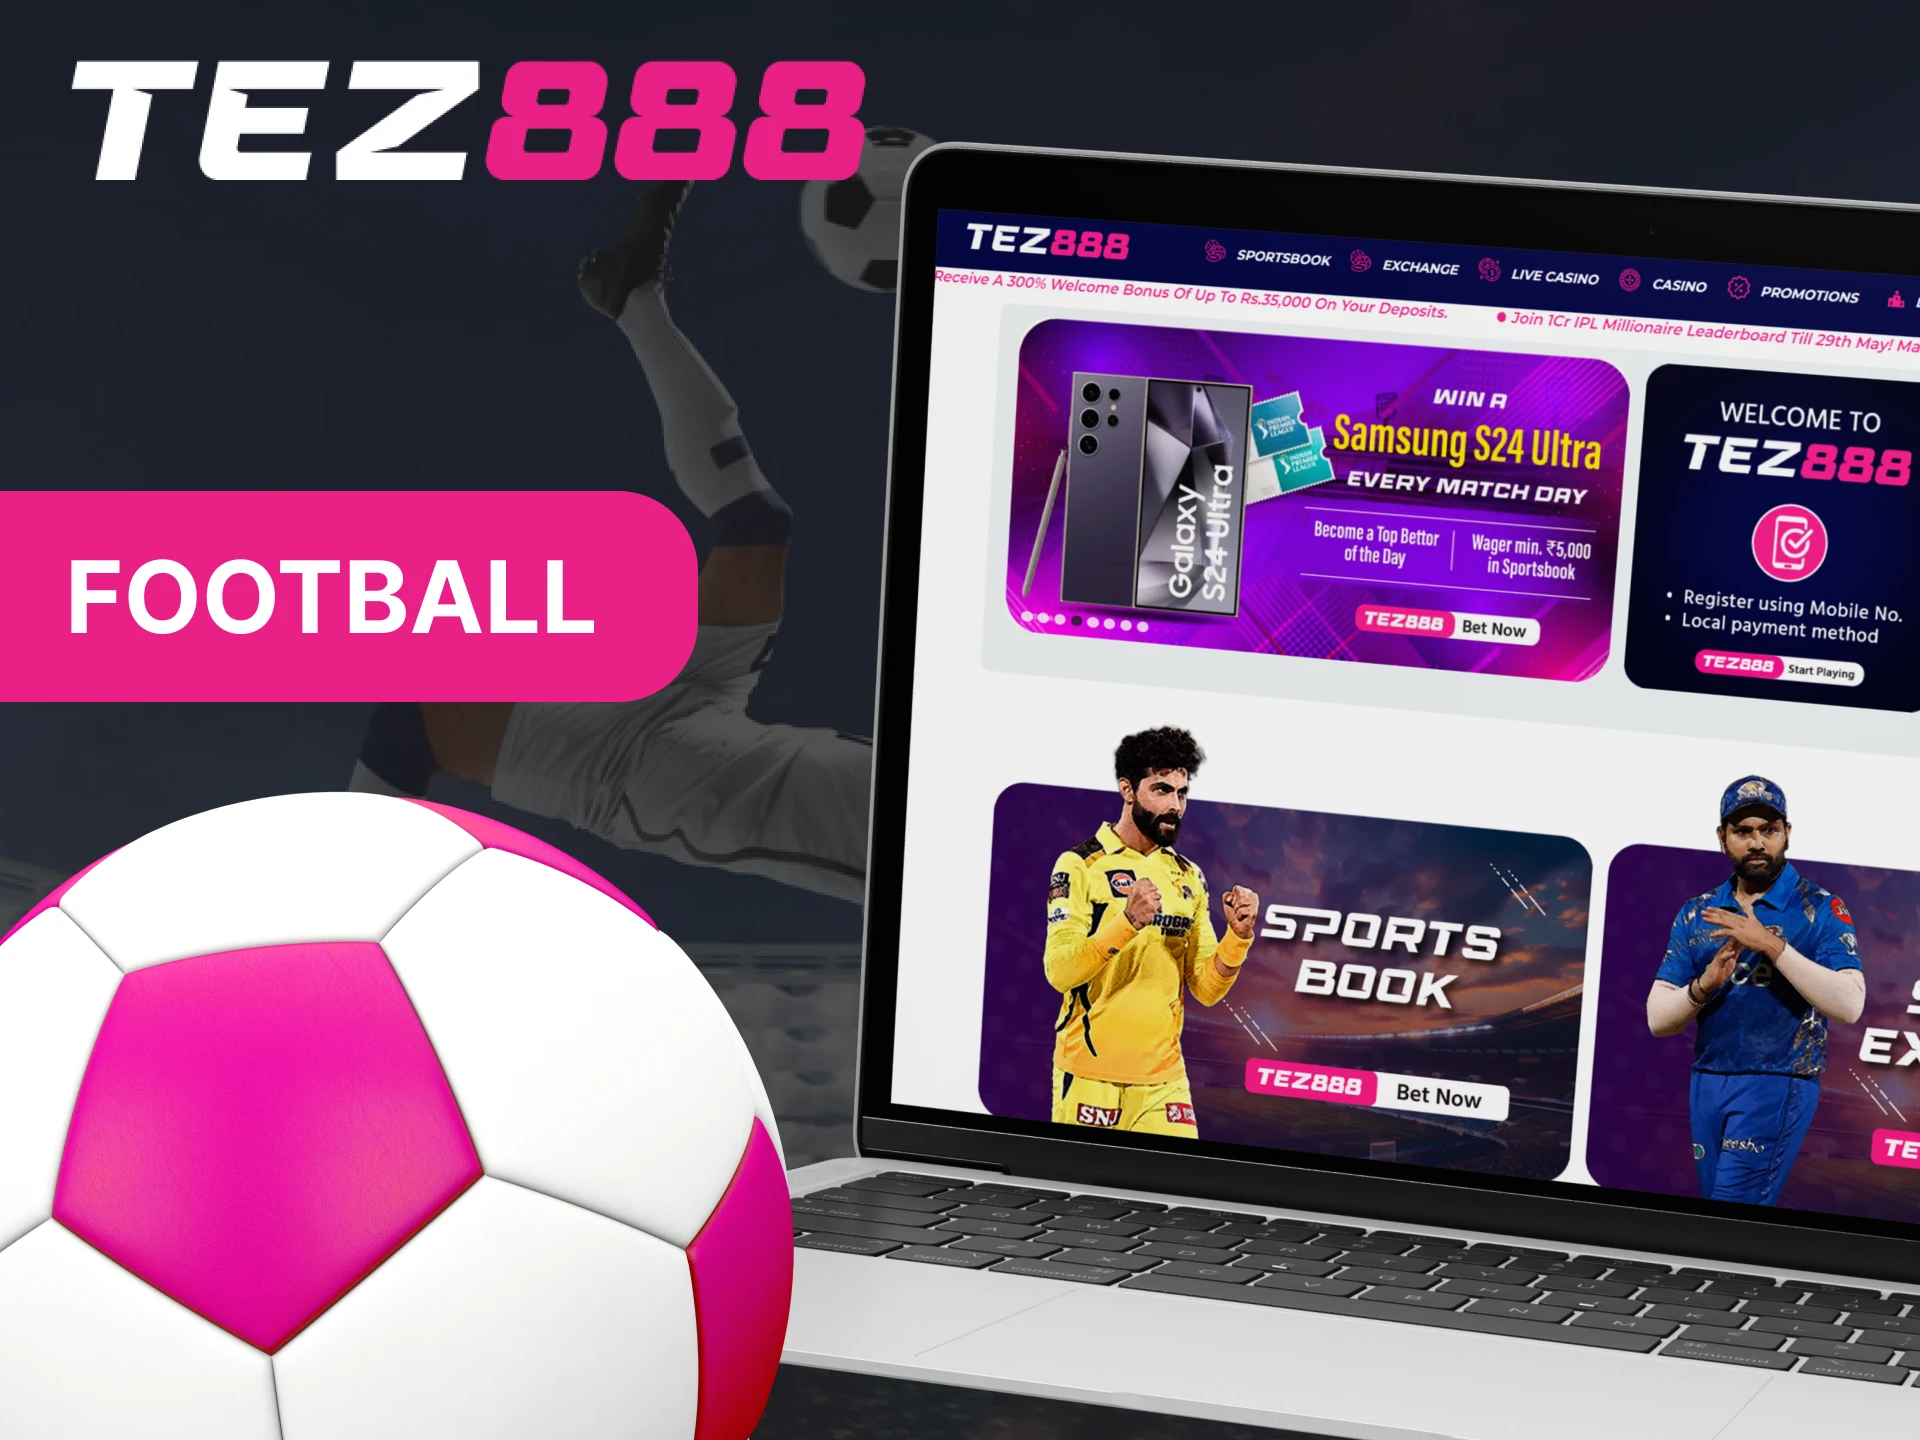 Football fans can place bets on this sport at Tez888 casino.